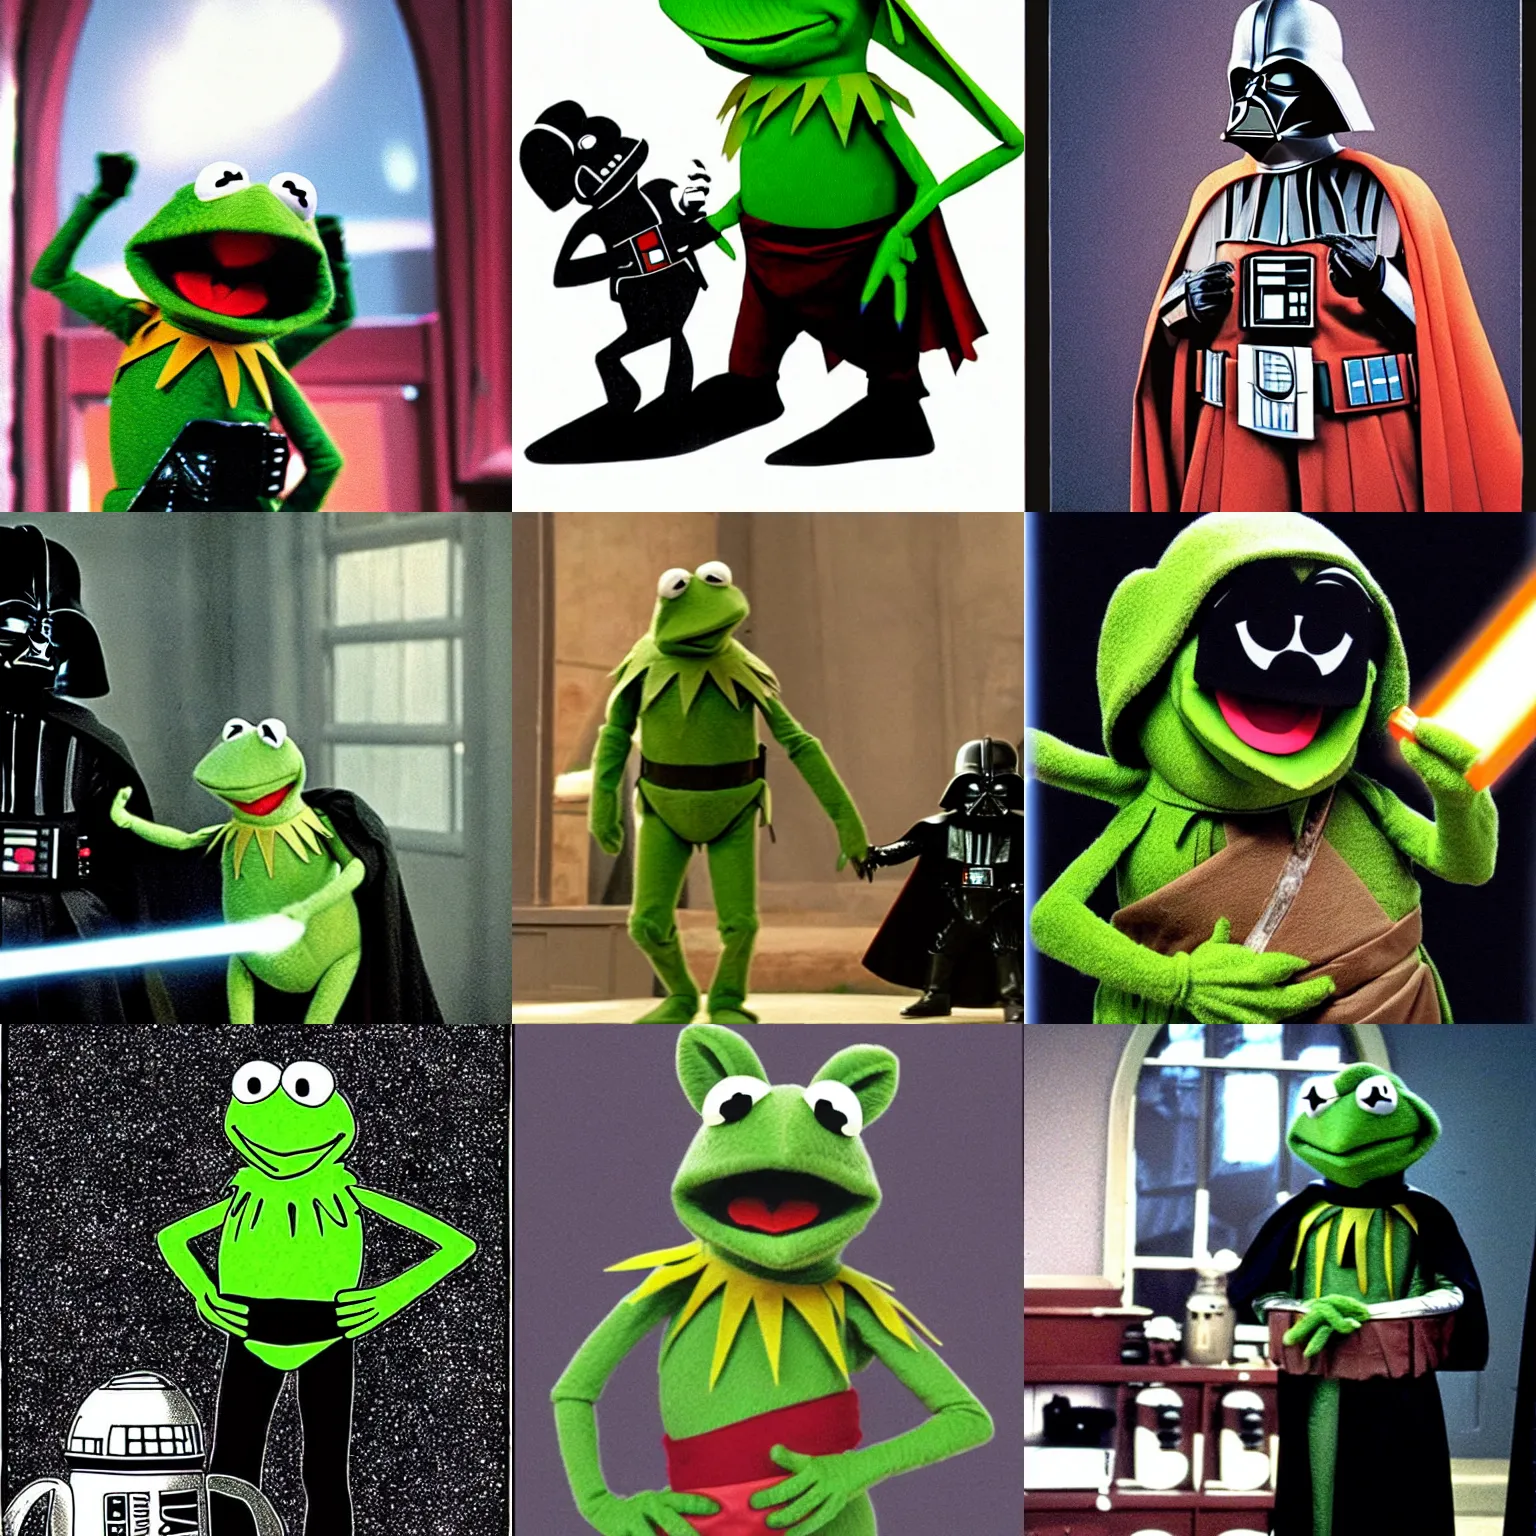 Prompt: Kermit the Frog from Sesame Street as Darth Vader in Star Wars